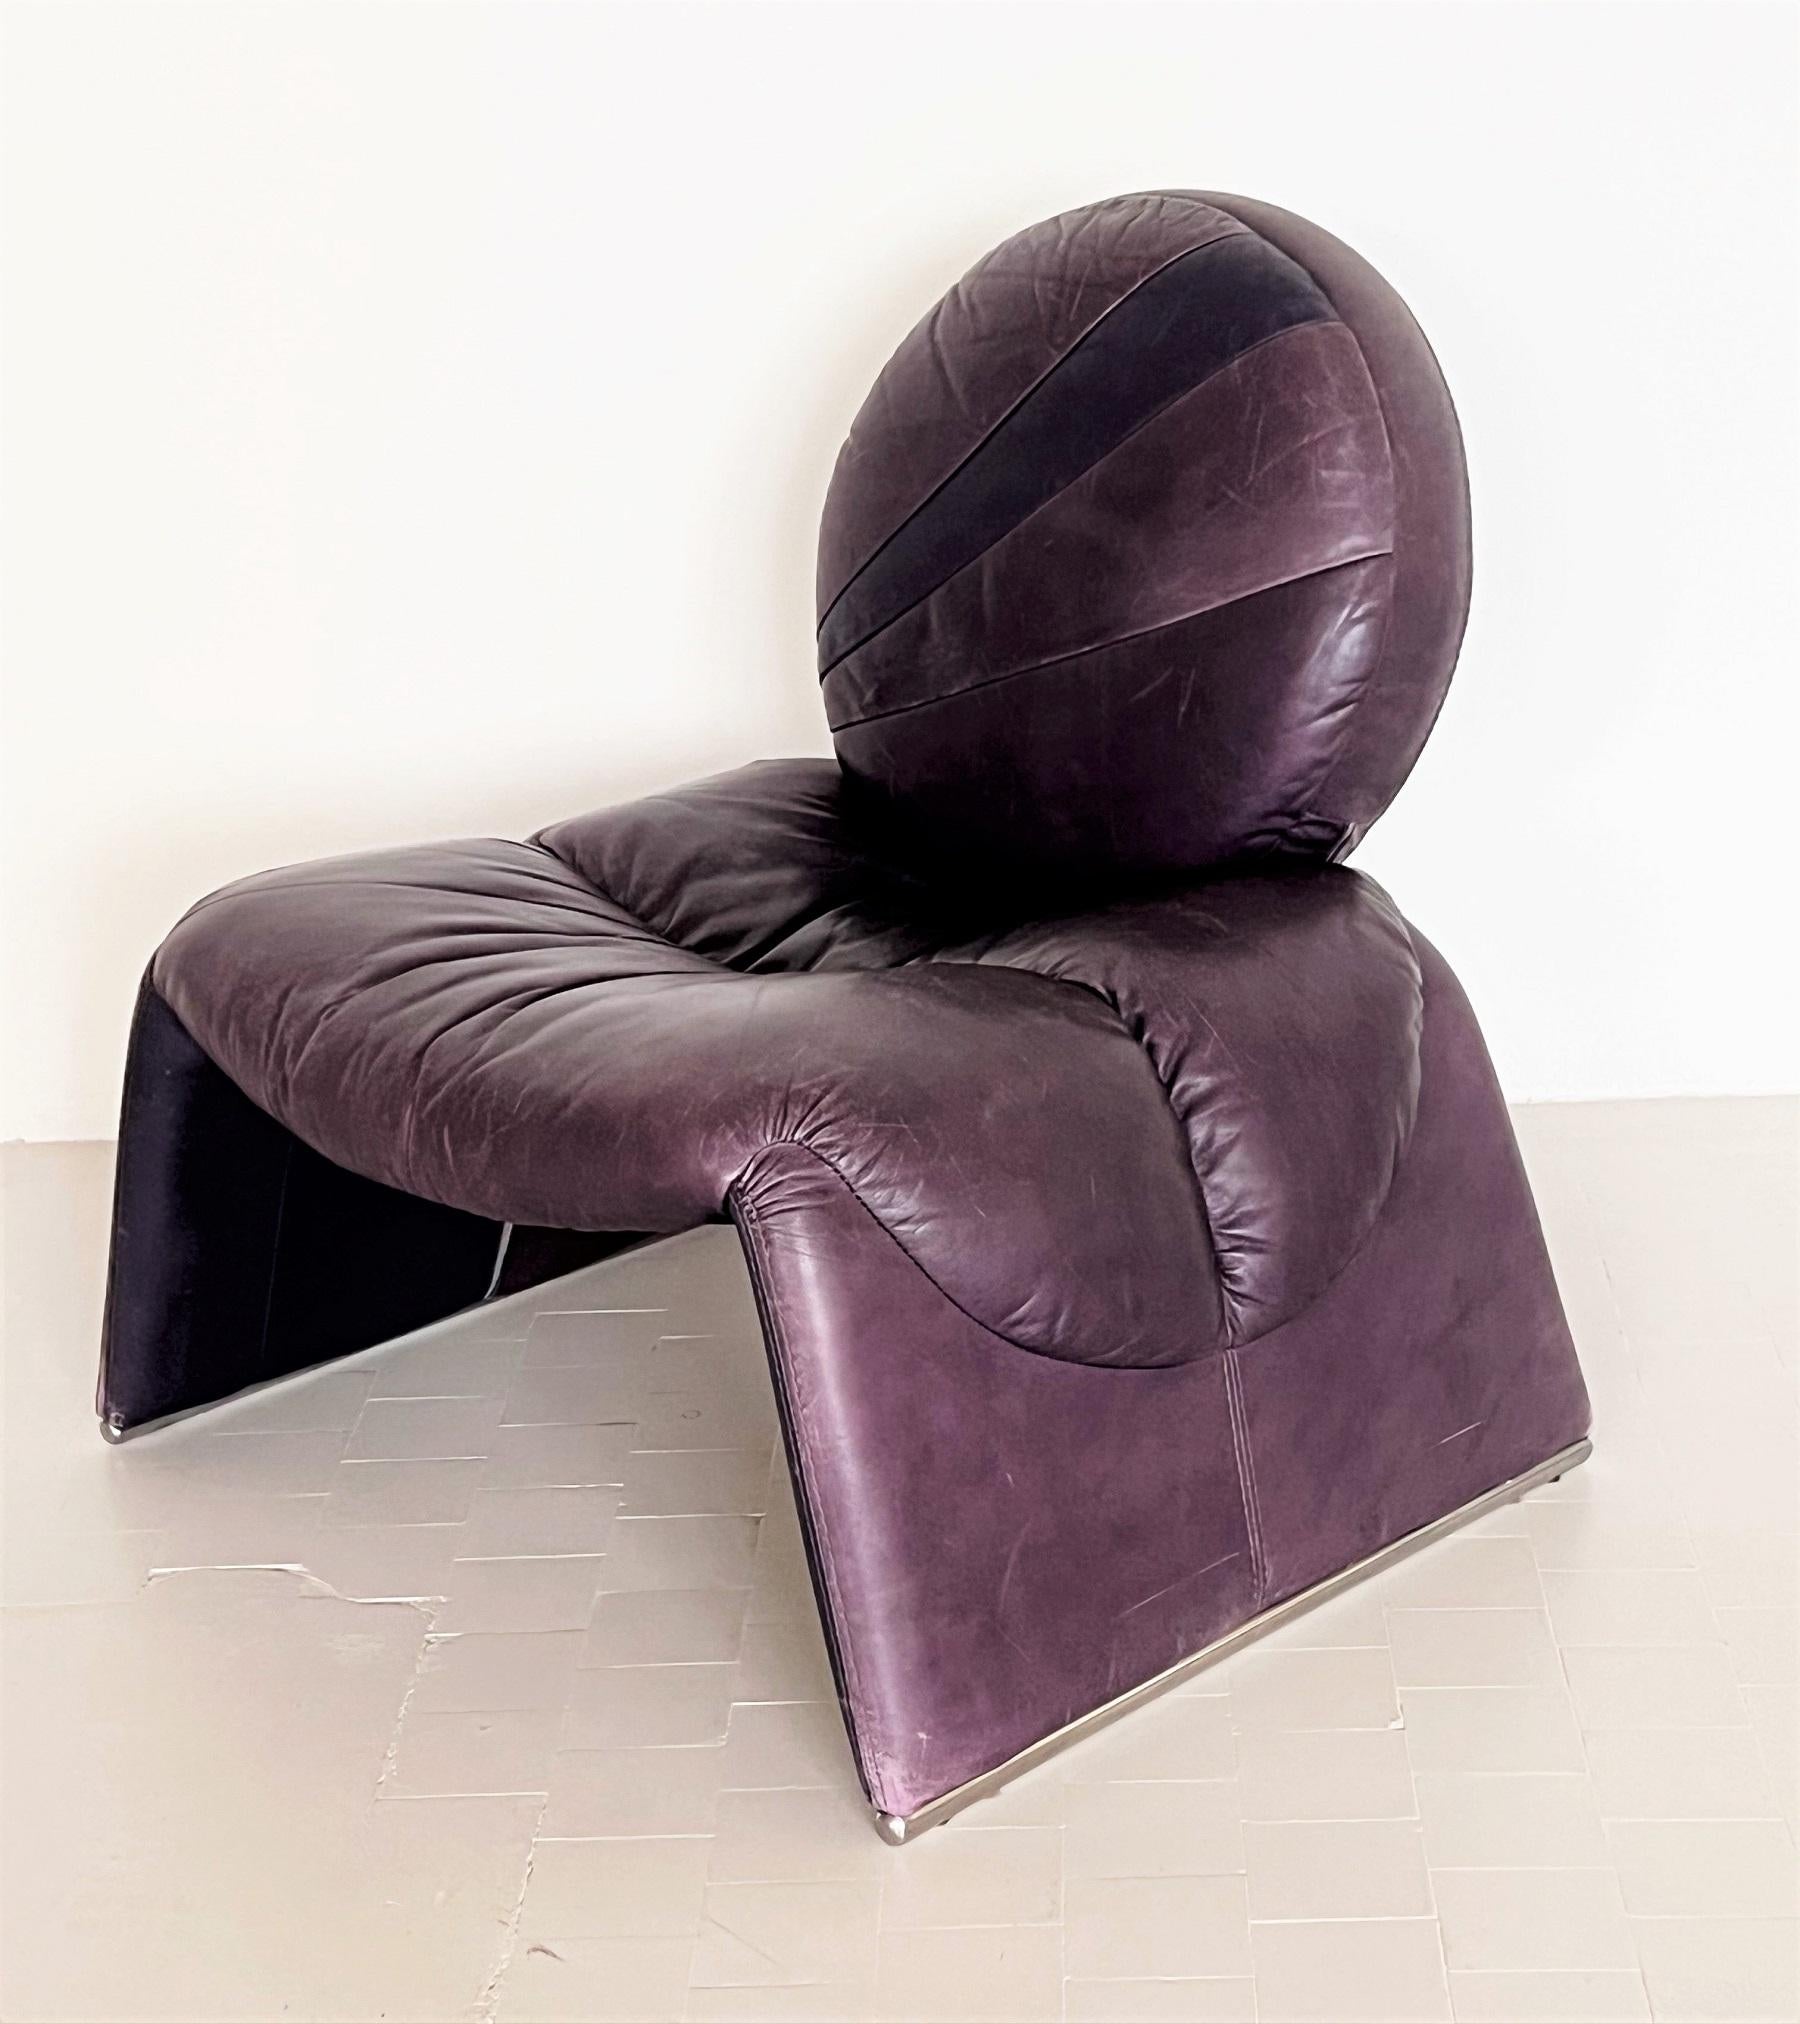 A beautiful and really comfortable lounge chair with saddle-effect seats in purple smooth leather.
The chair has its original leather upholstery. 
Designed in the 1970s by Vittorio Introini and manufactured in the 1980s by Saporiti Italia.
Founded